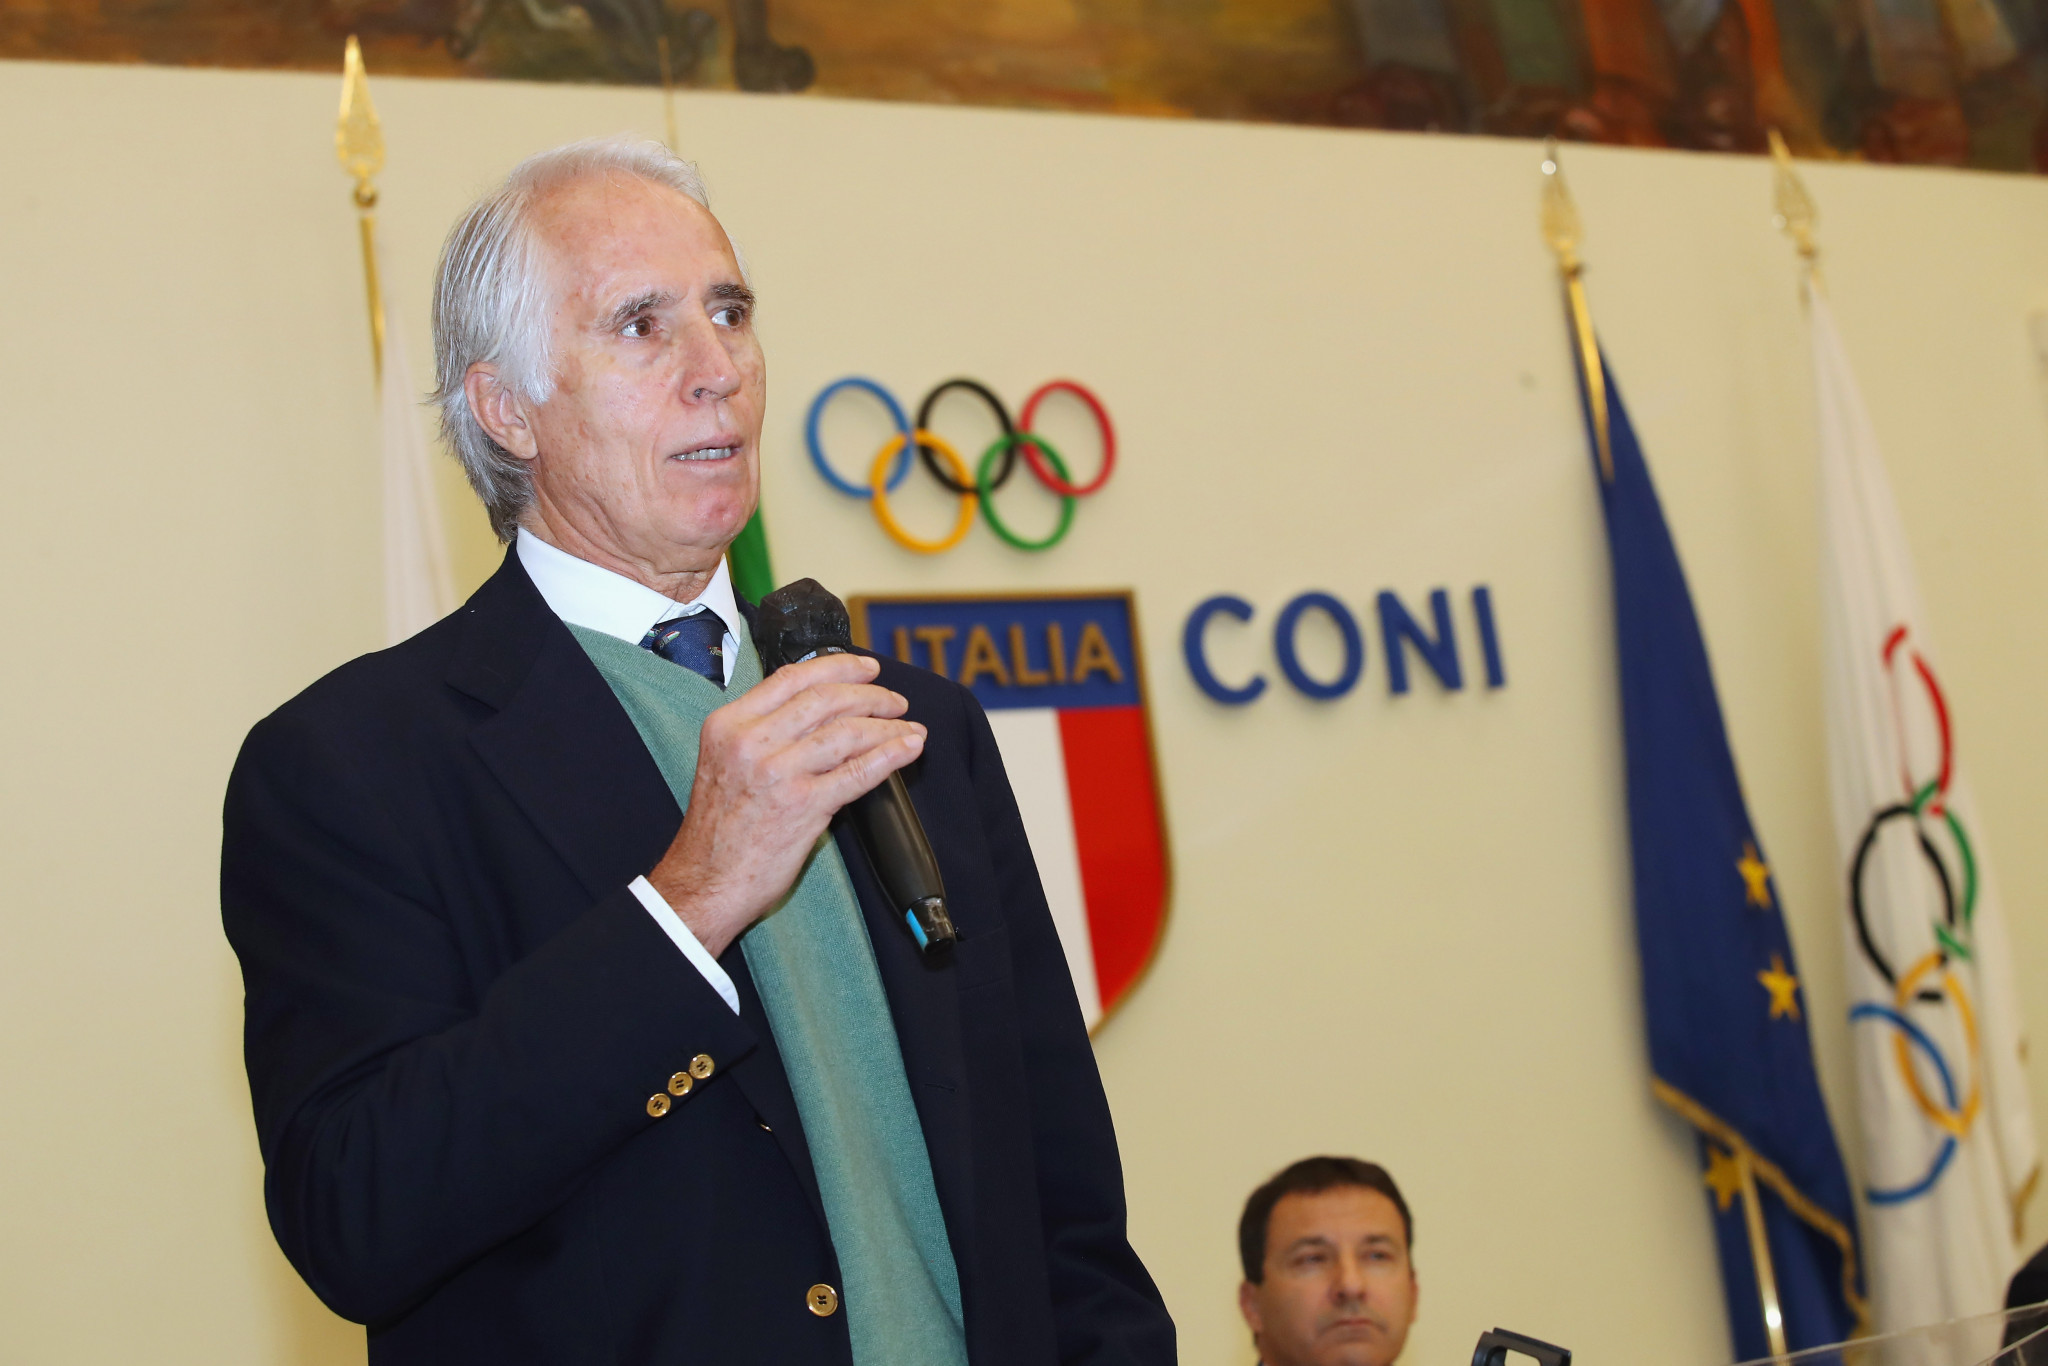 Malagò insists sports facilities the "priority" for 2026 Olympics with speed skating set for Milan switch